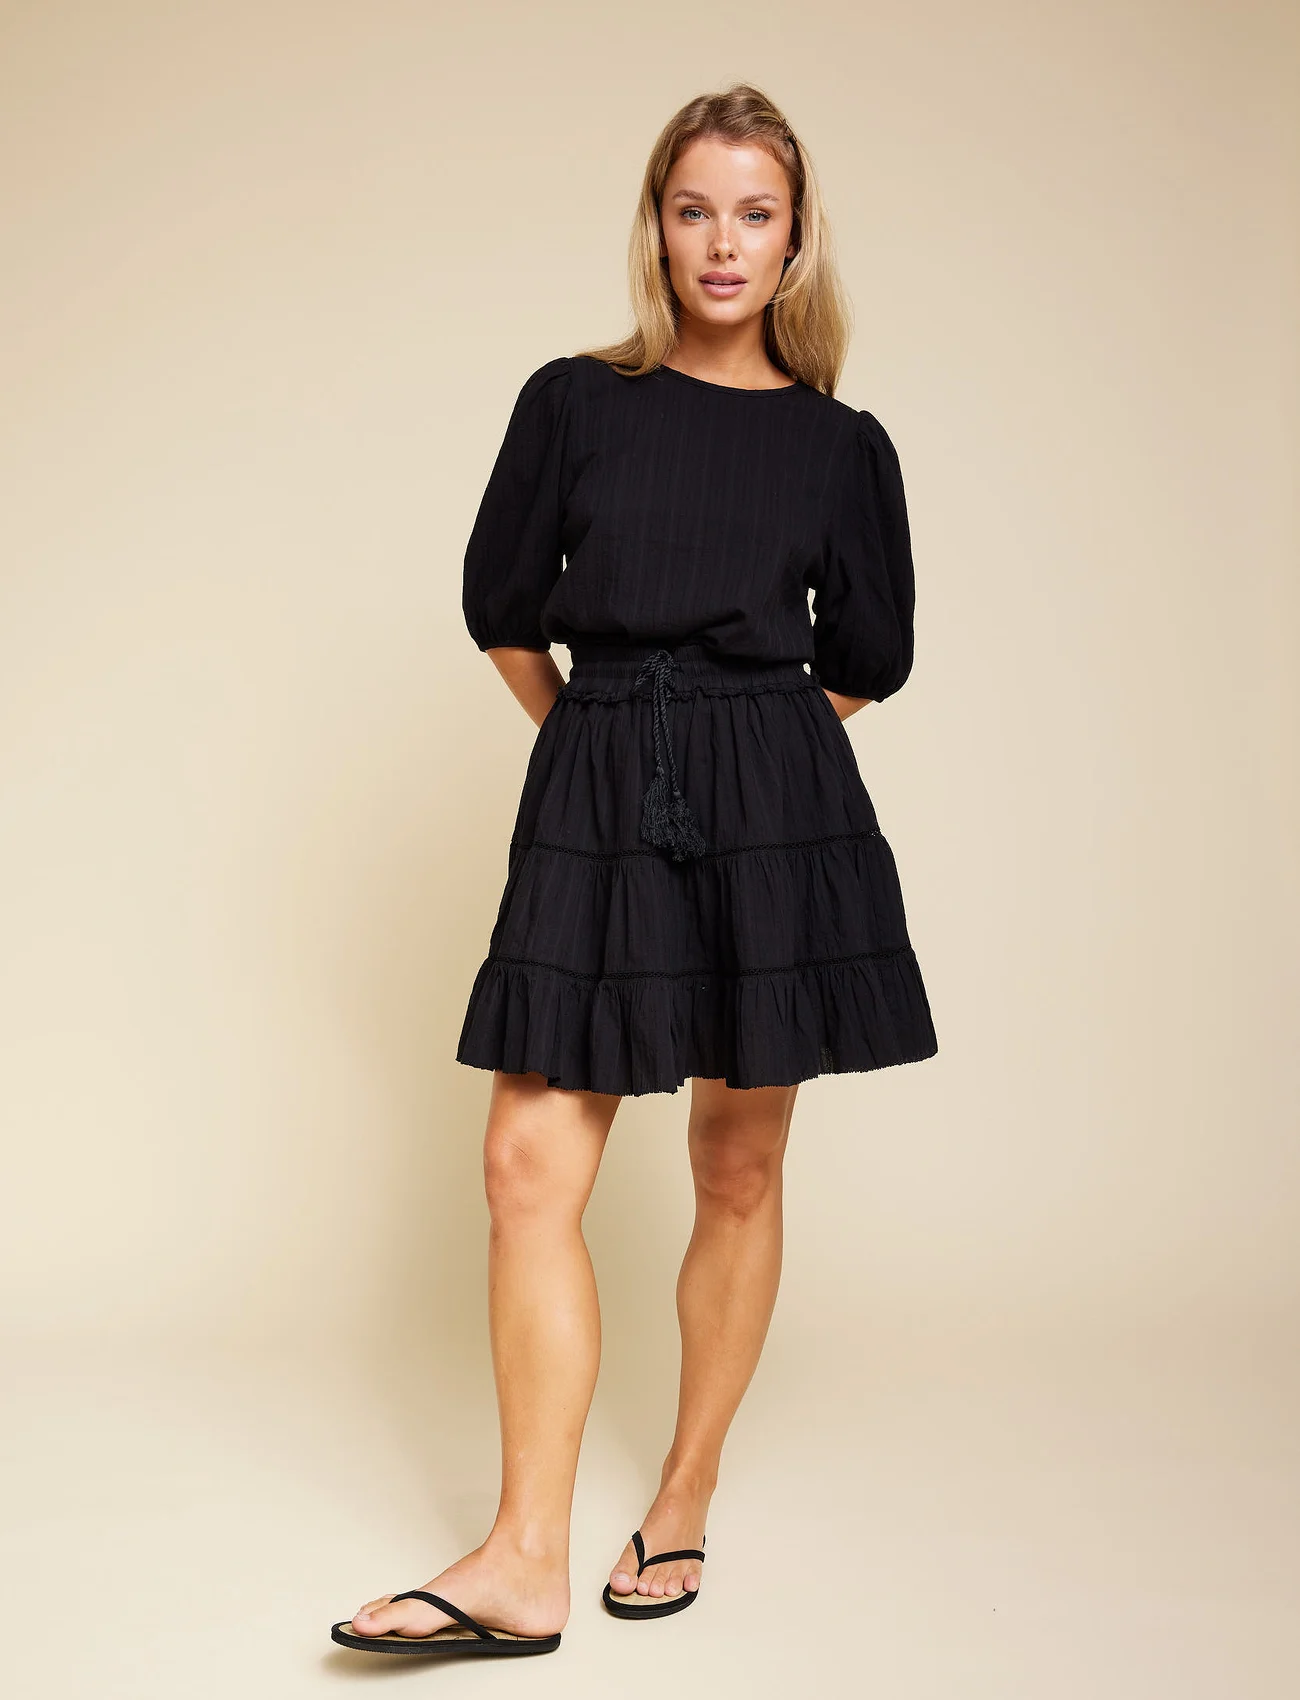 Line of Oslo - Hutton solid - short skirts - black - 1